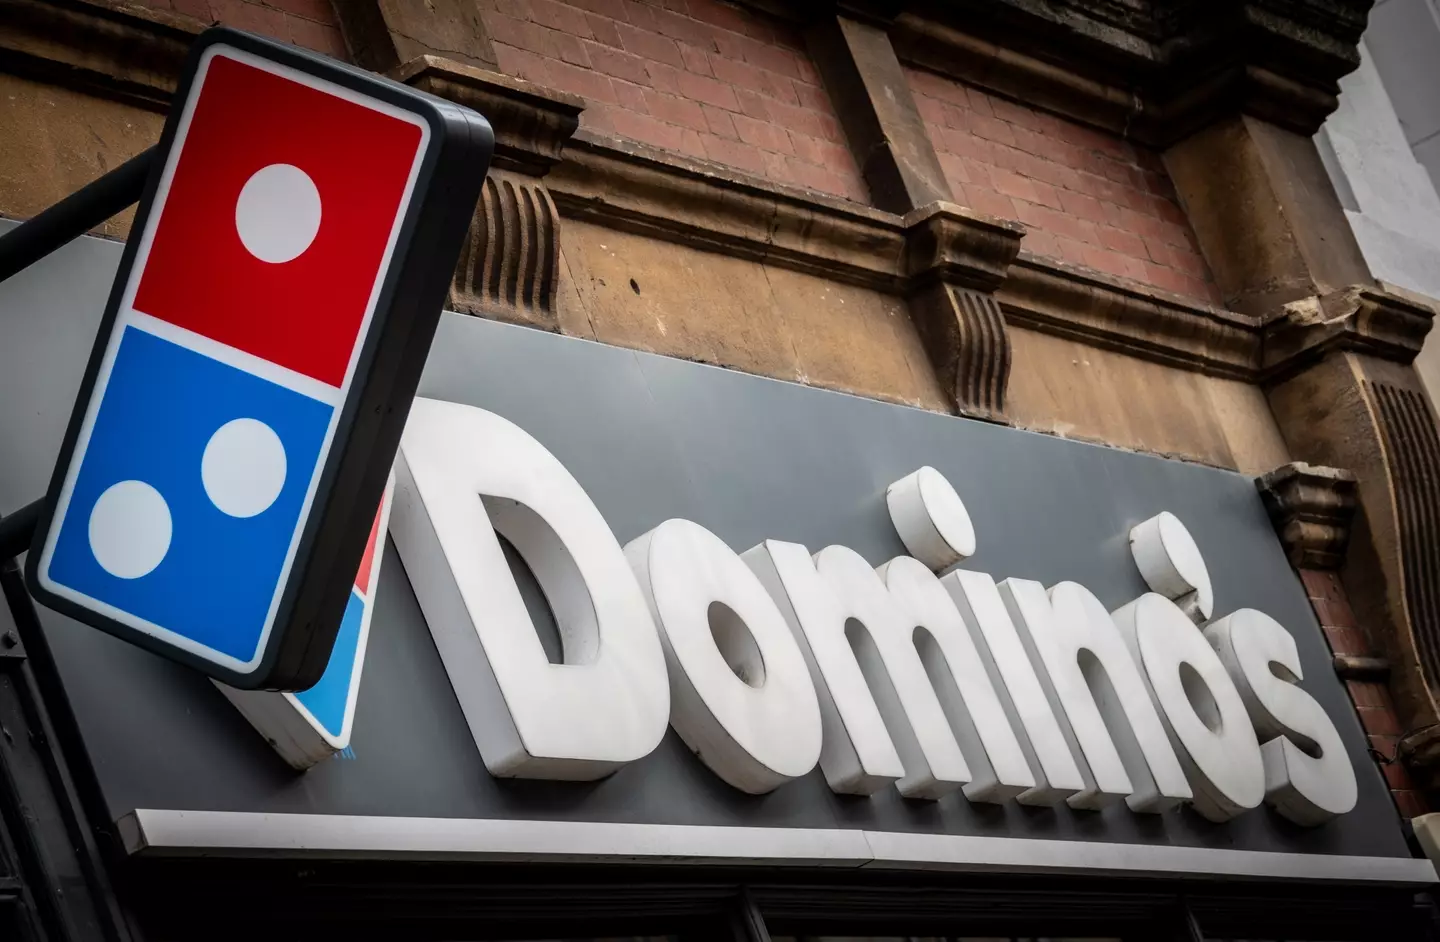 Domino's is giving away $1 million worth of free pizza.